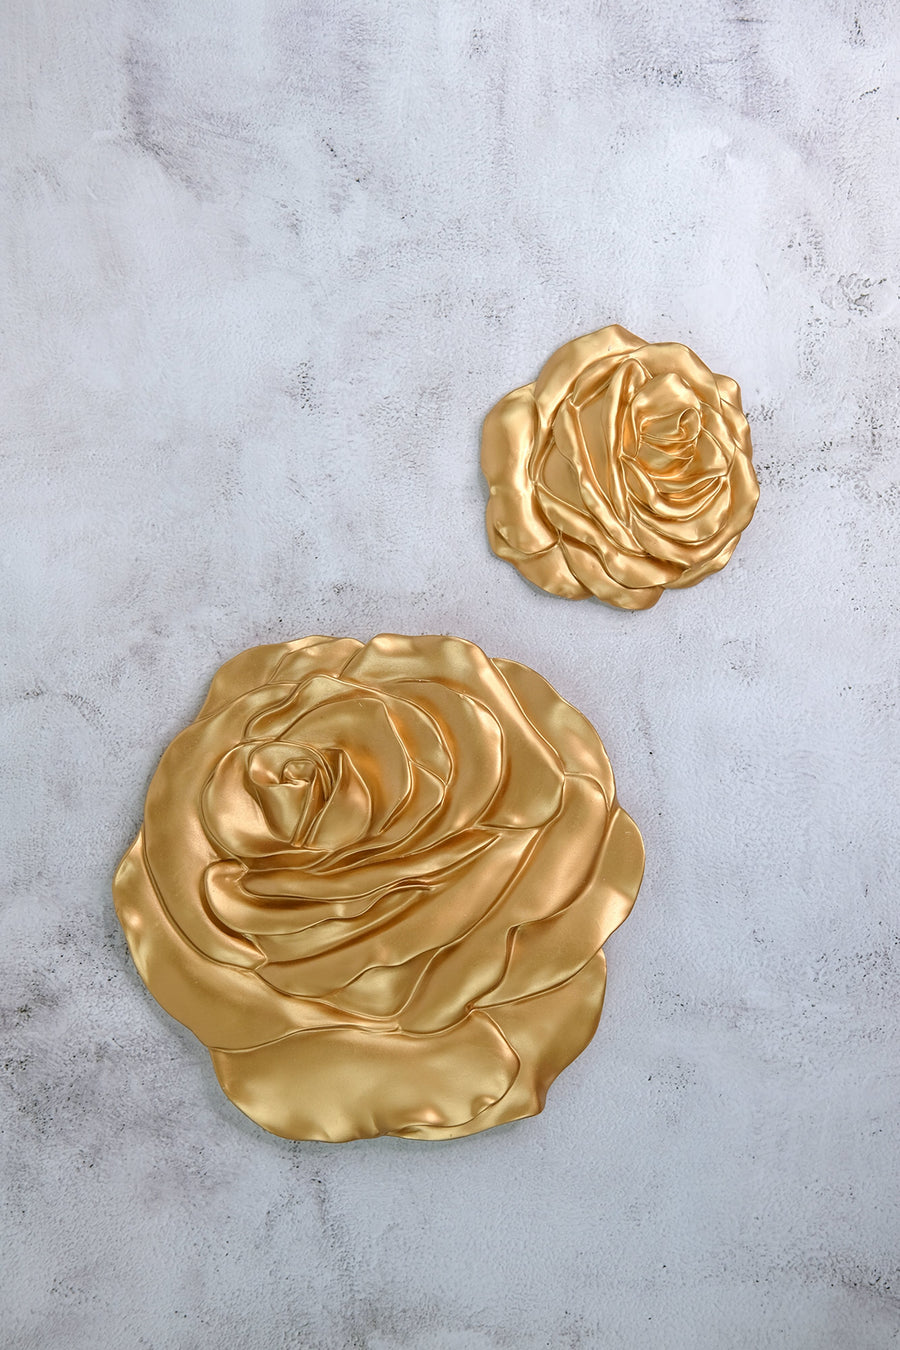 Shine flowers Wall Decor in Gold